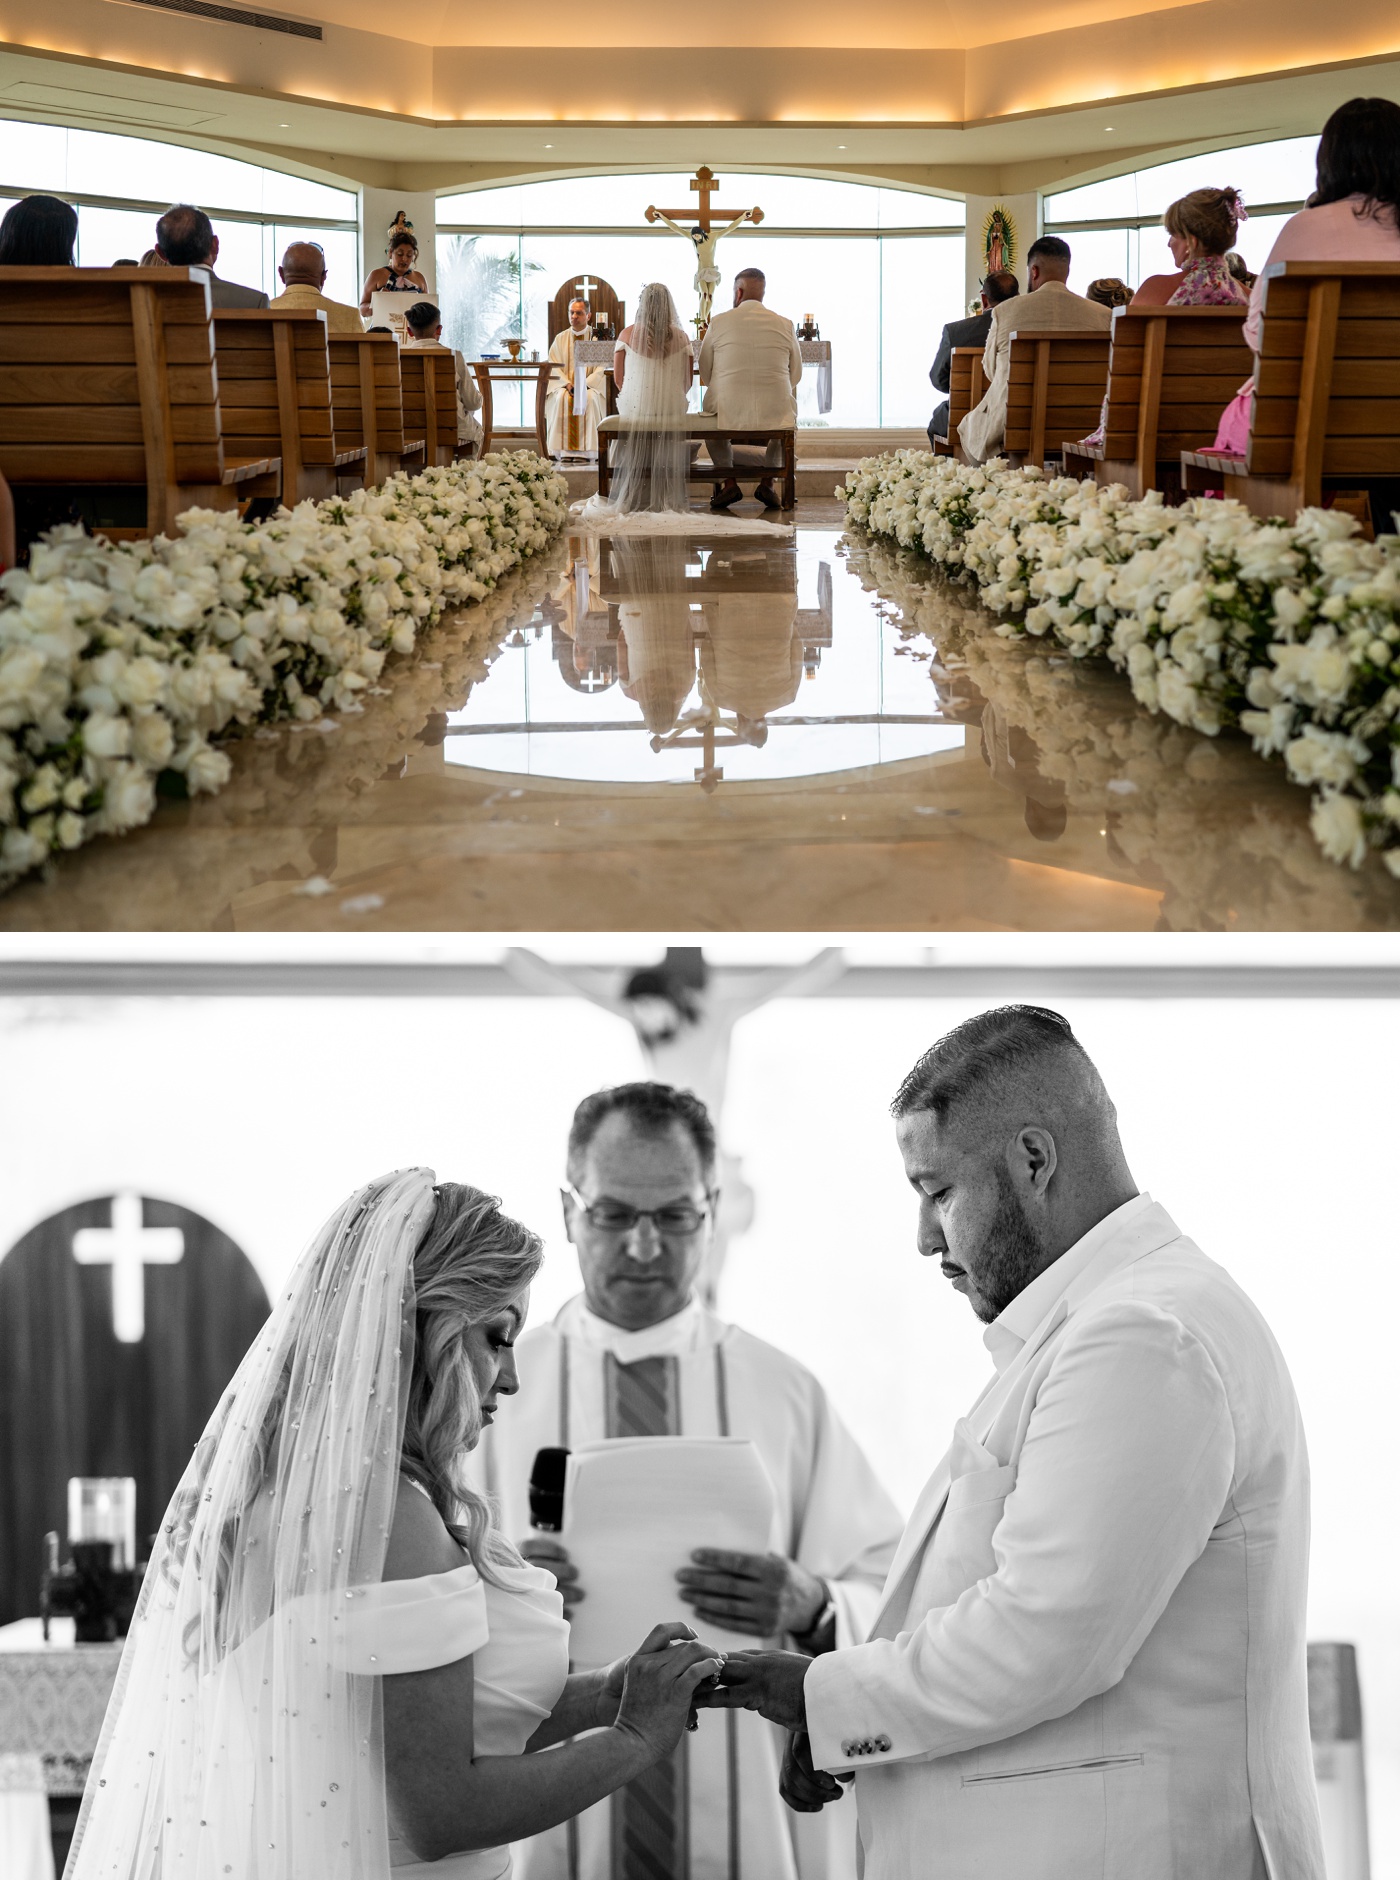 Catholic wedding ceremony in the chapel at Moon Palace Cancùn